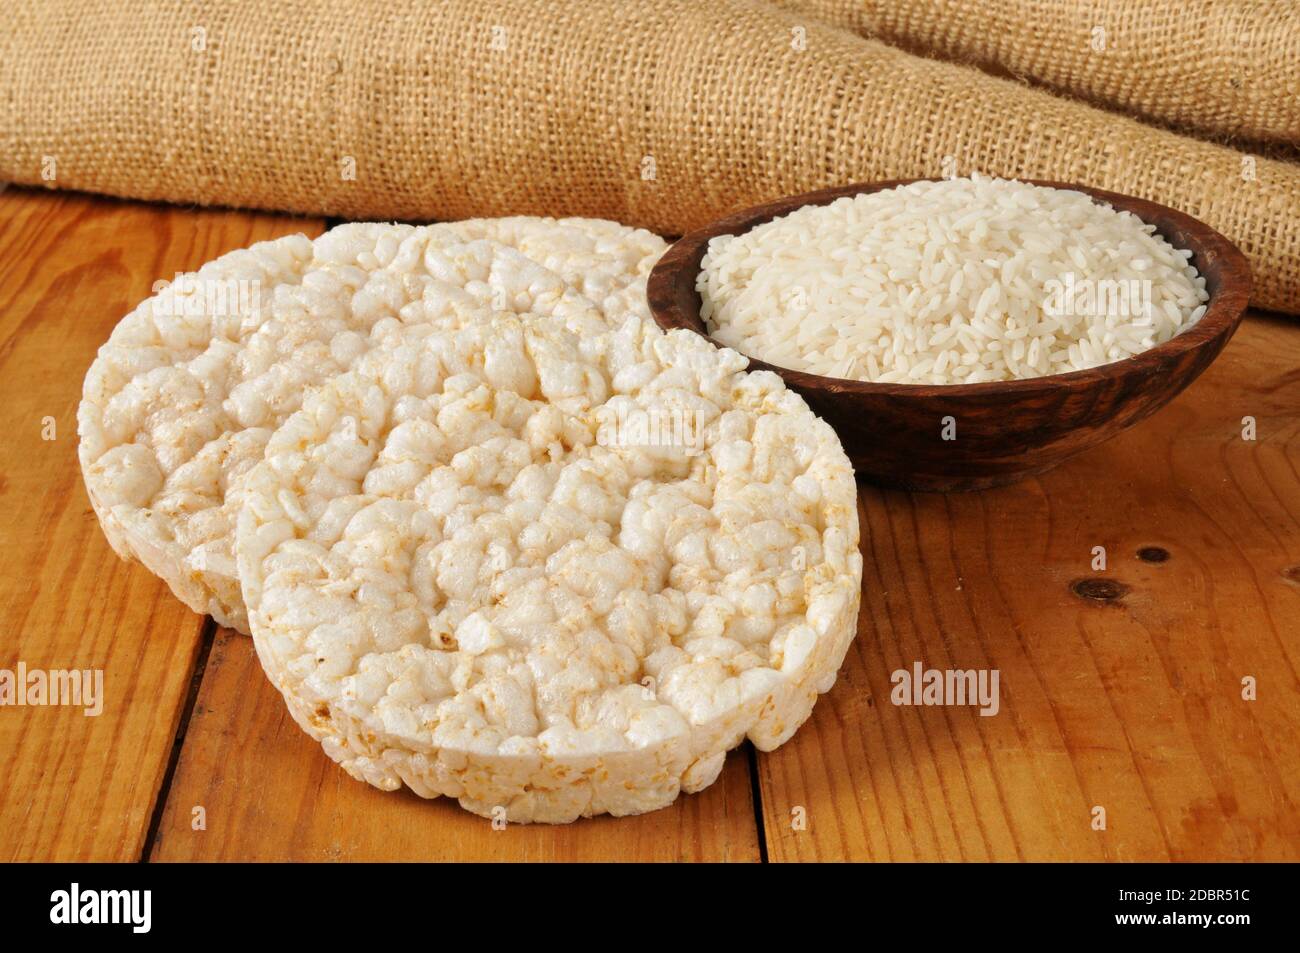 Puffed ricecakes with uncooked long grain white rice Stock Photo